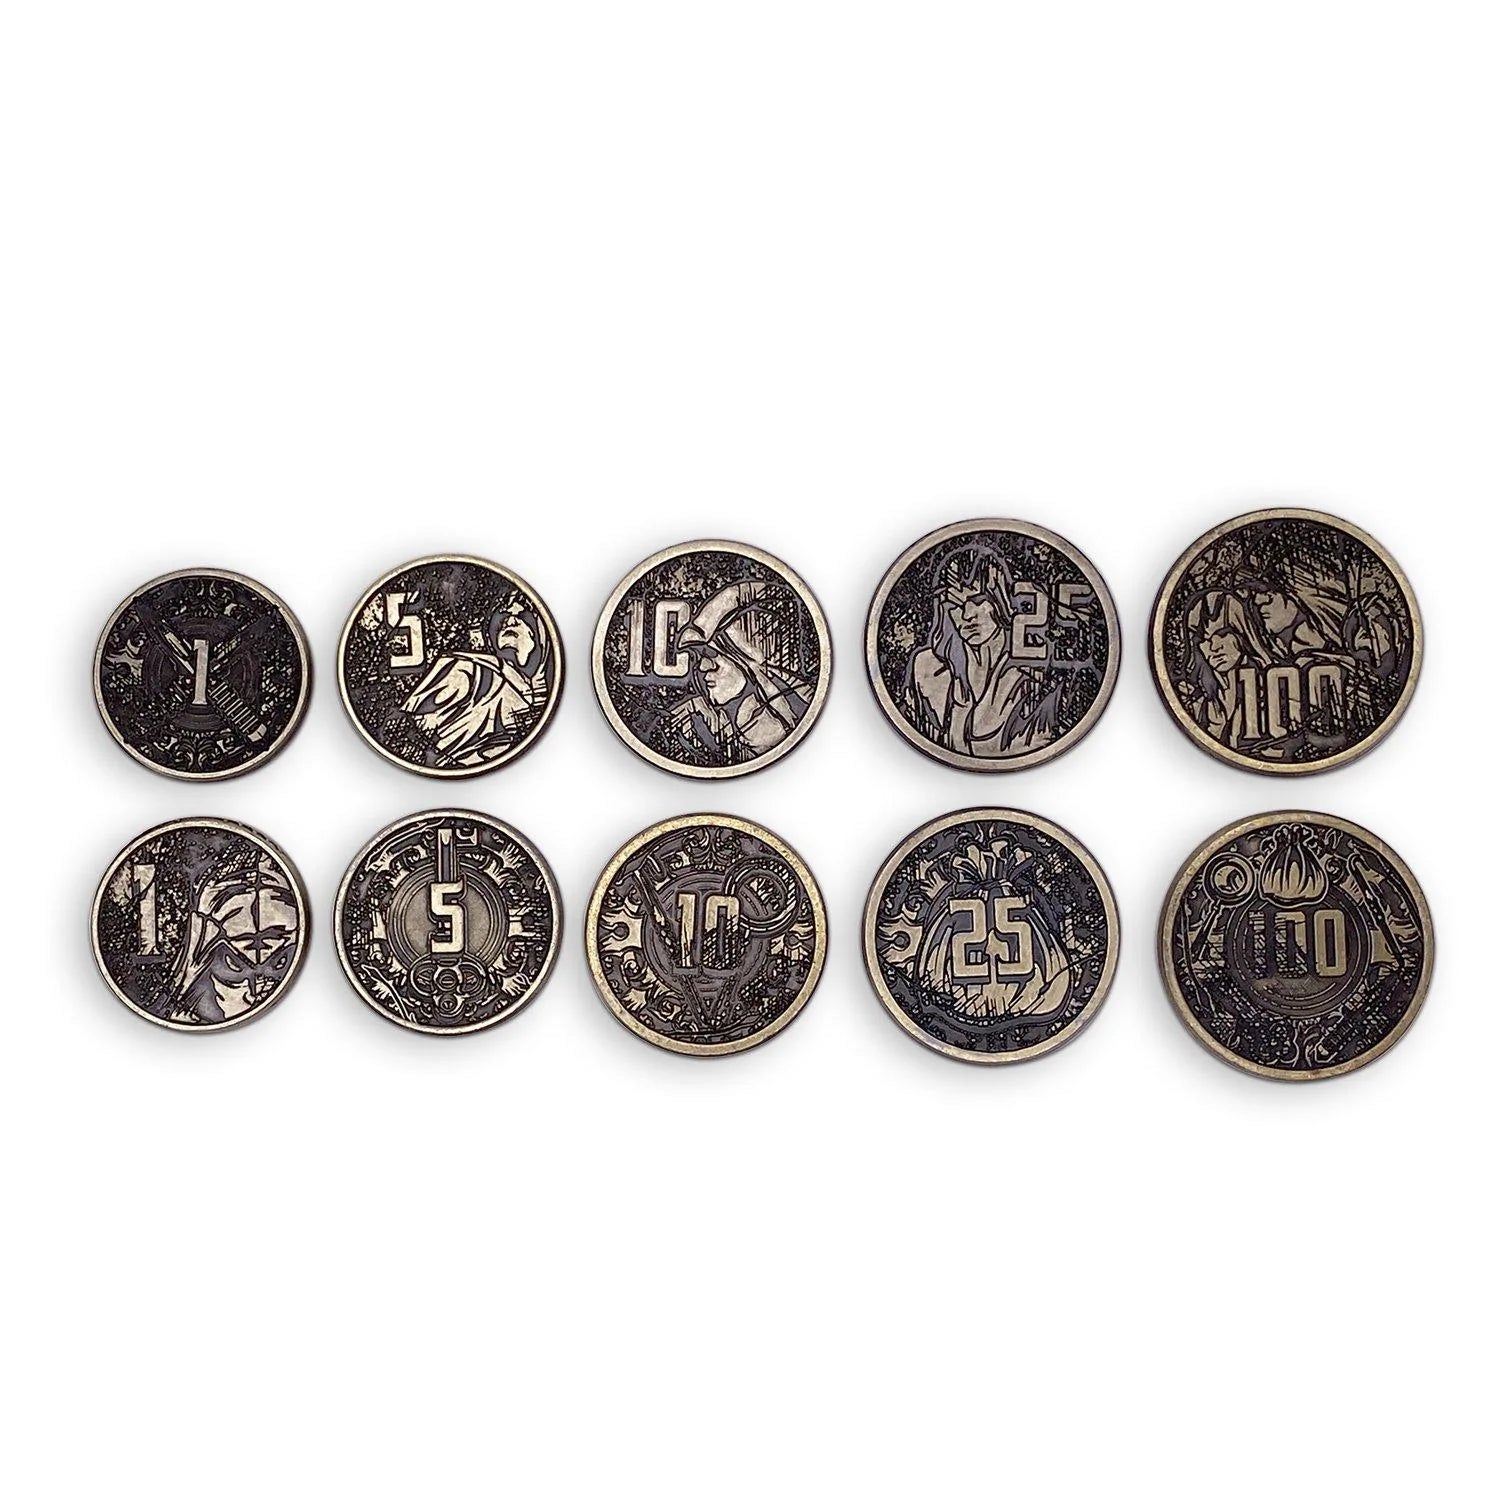 ADVENTURE COINS – THIEVES METAL COINS SET OF 10 | Gopher Games